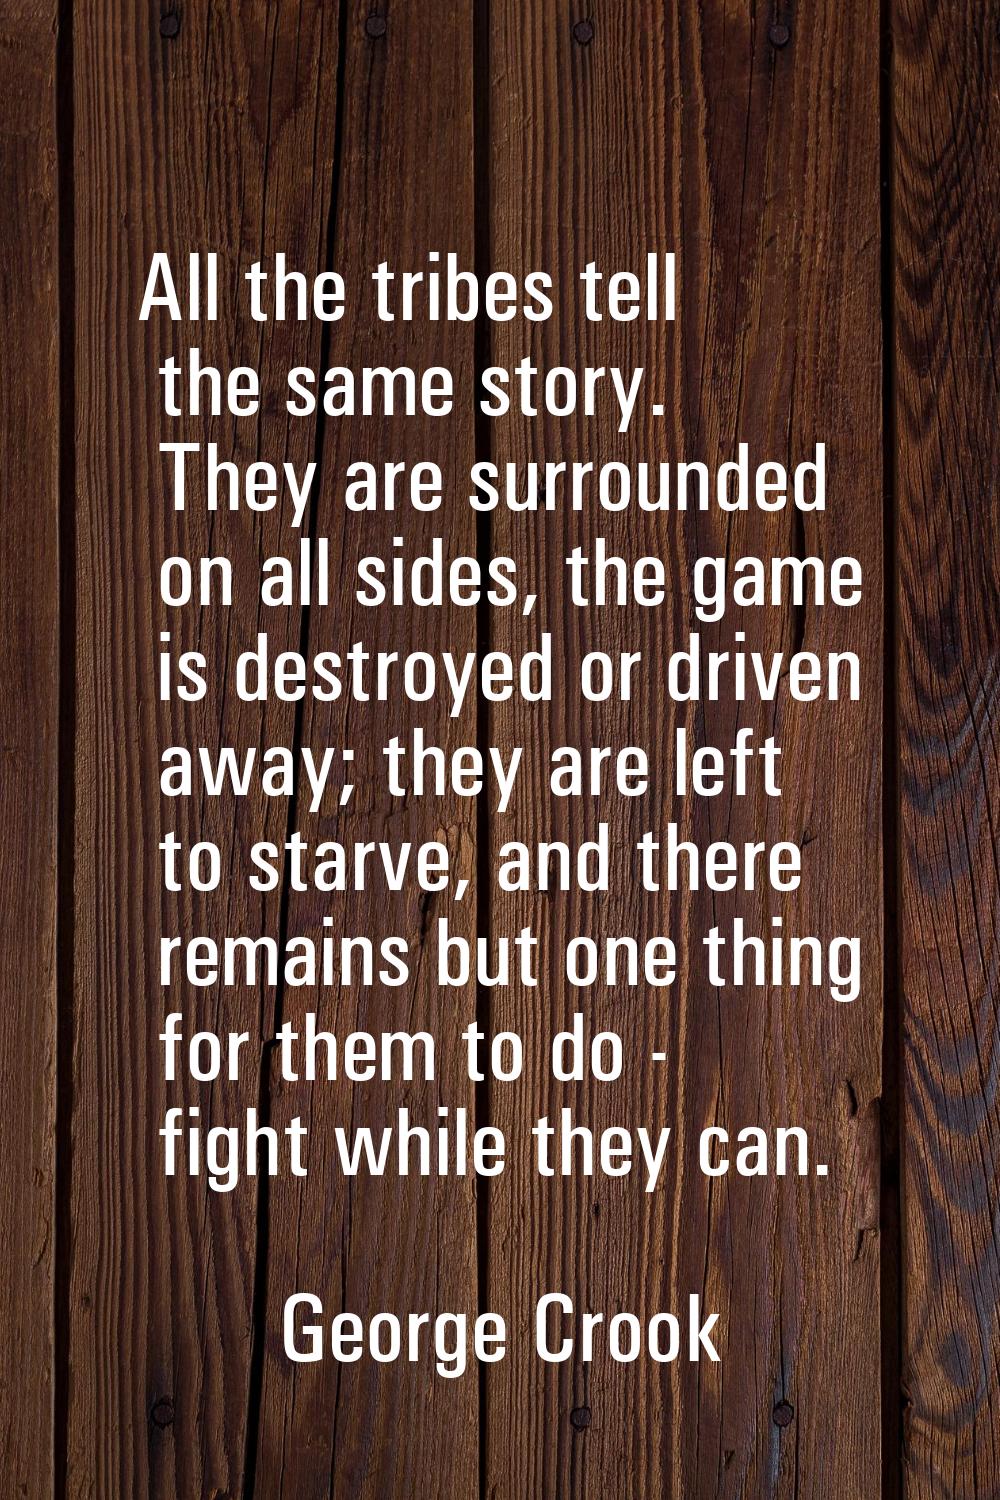 All the tribes tell the same story. They are surrounded on all sides, the game is destroyed or driv